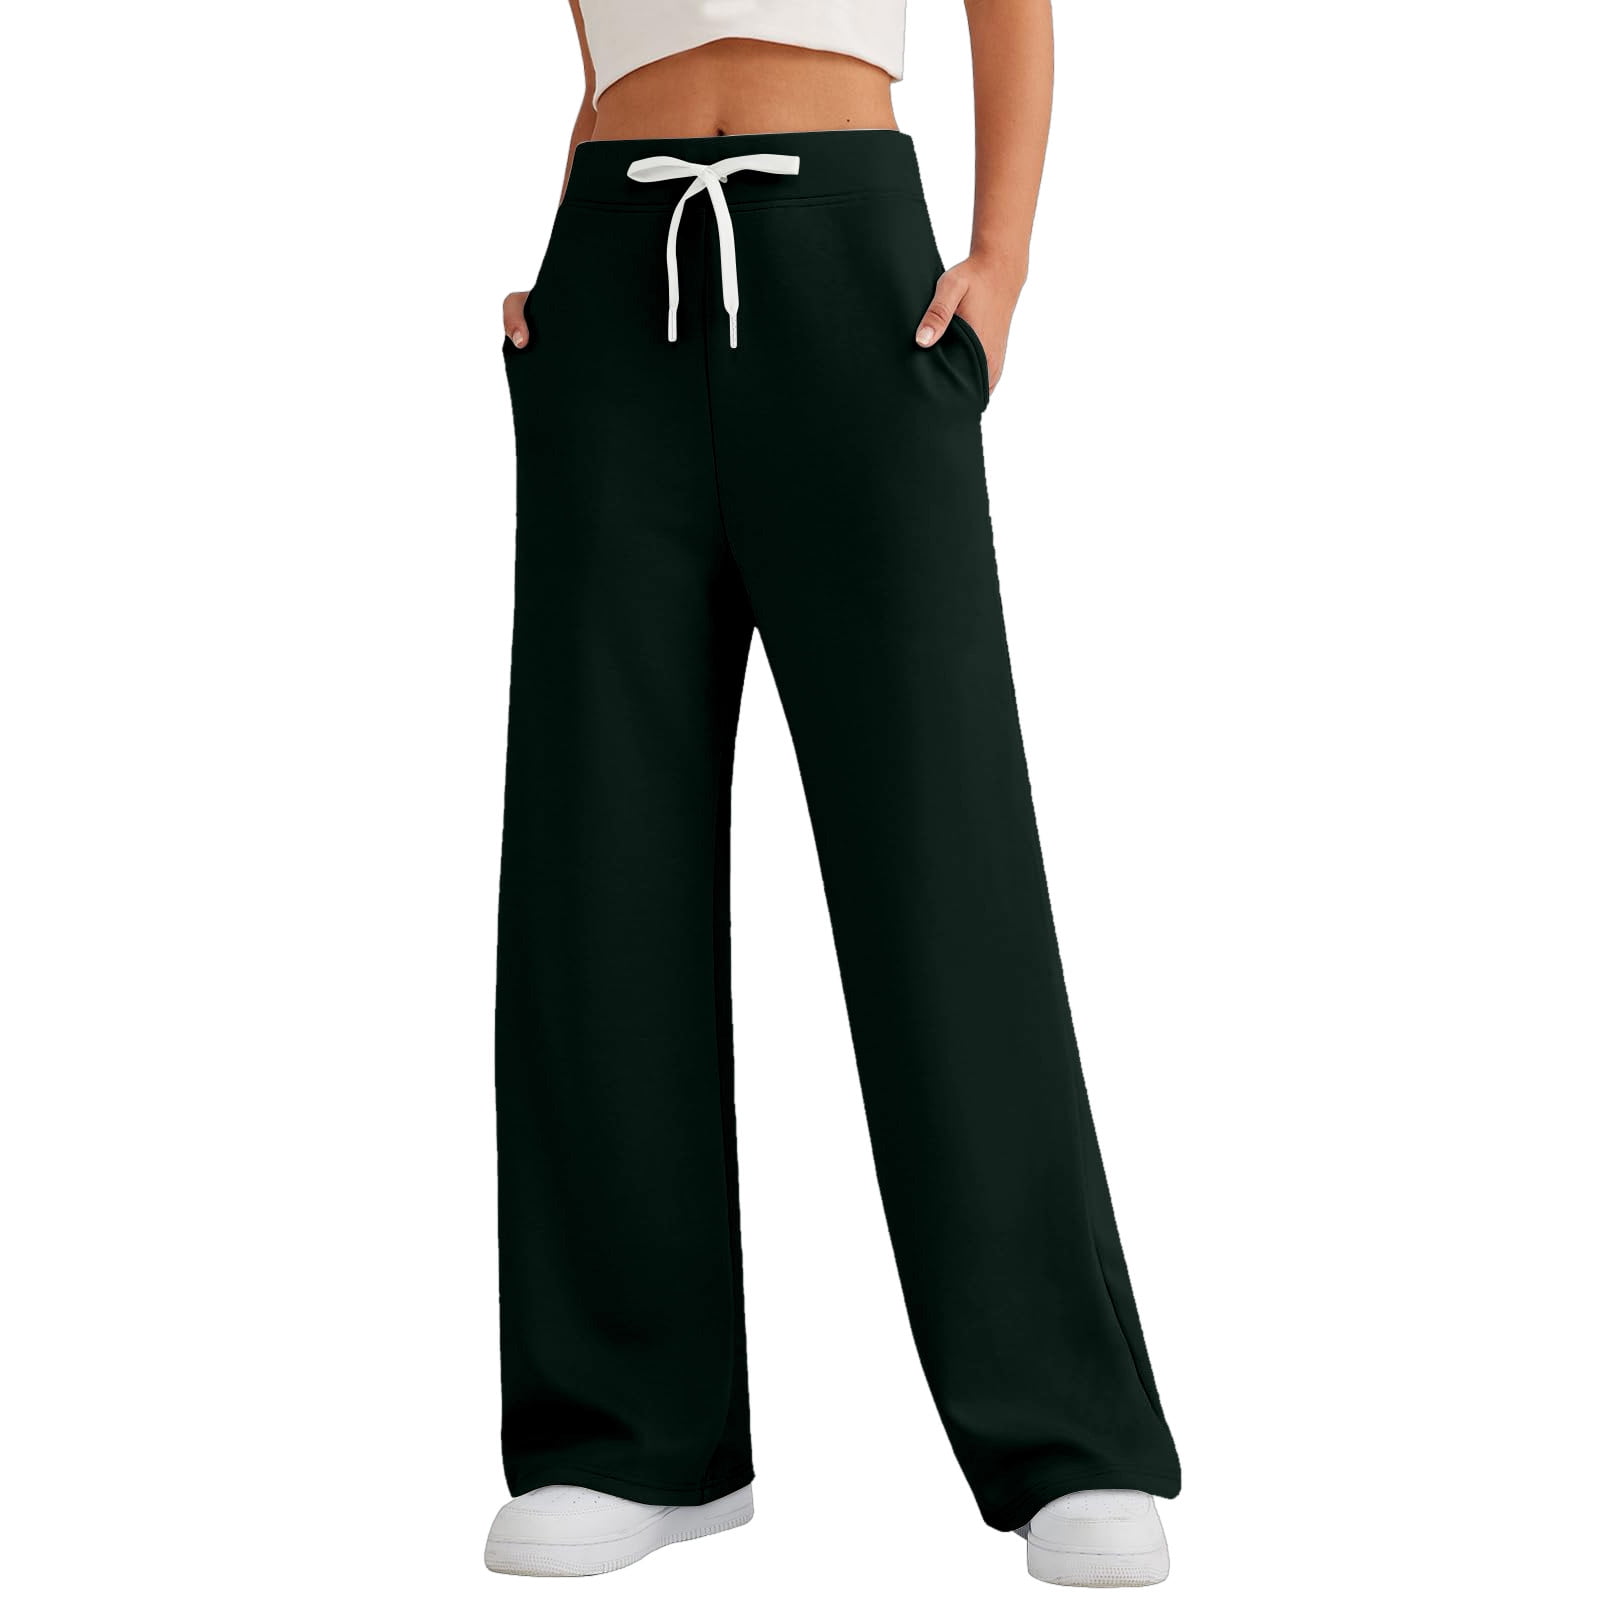 Susanny Sweatpants for Women with Pockets with Pockets Baggy Petite Fleece  Lined Joggers Pants Straight Leg Clearance Drawstring High Waisted Women's  Loose Sweat Pants Green M 